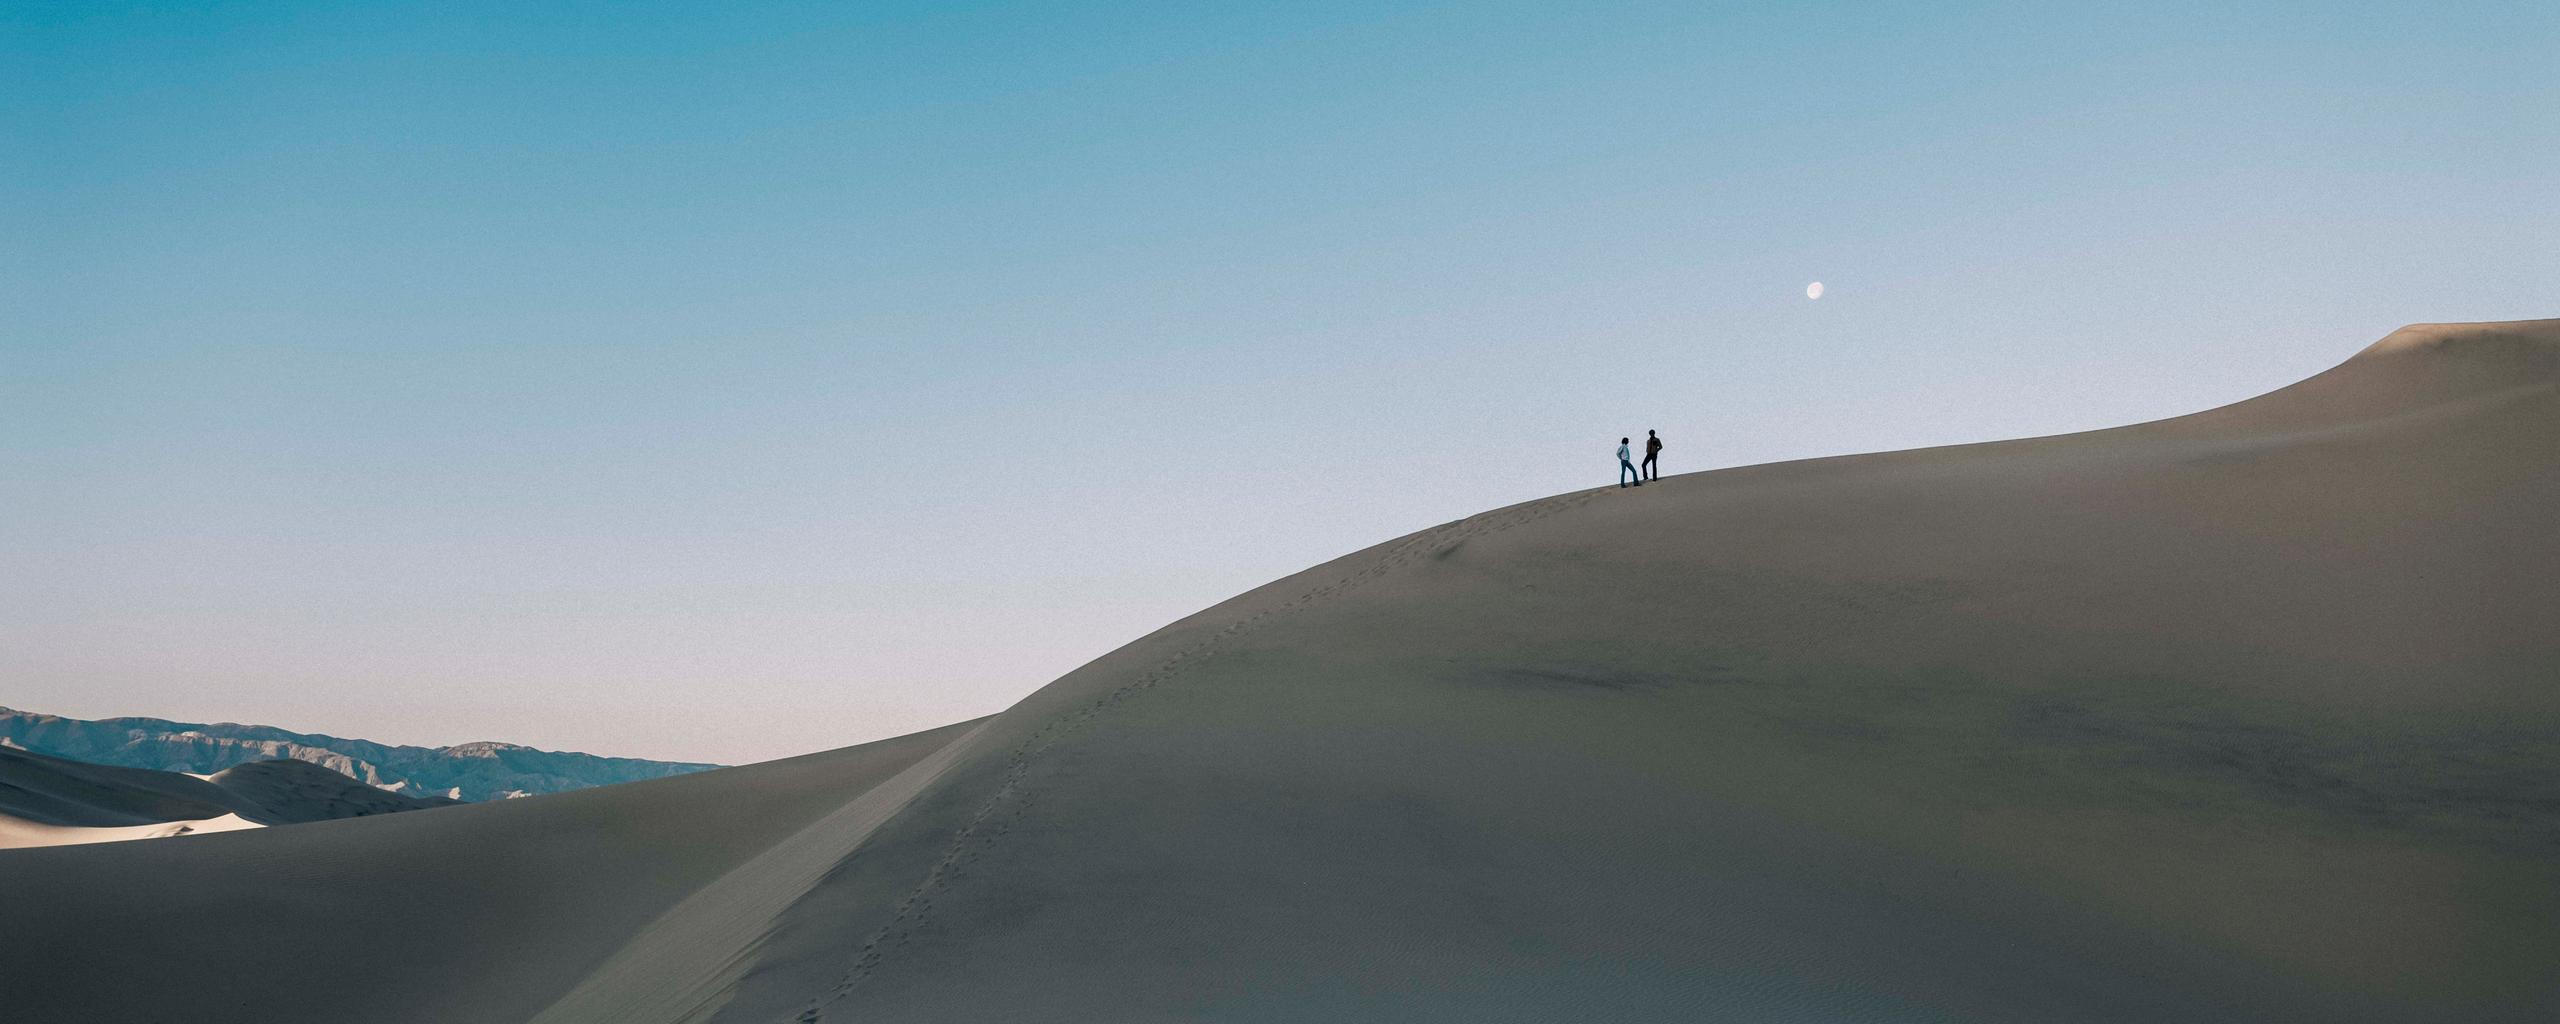 Man and woman standing on sand dune at Imperial Sand Dunes in California